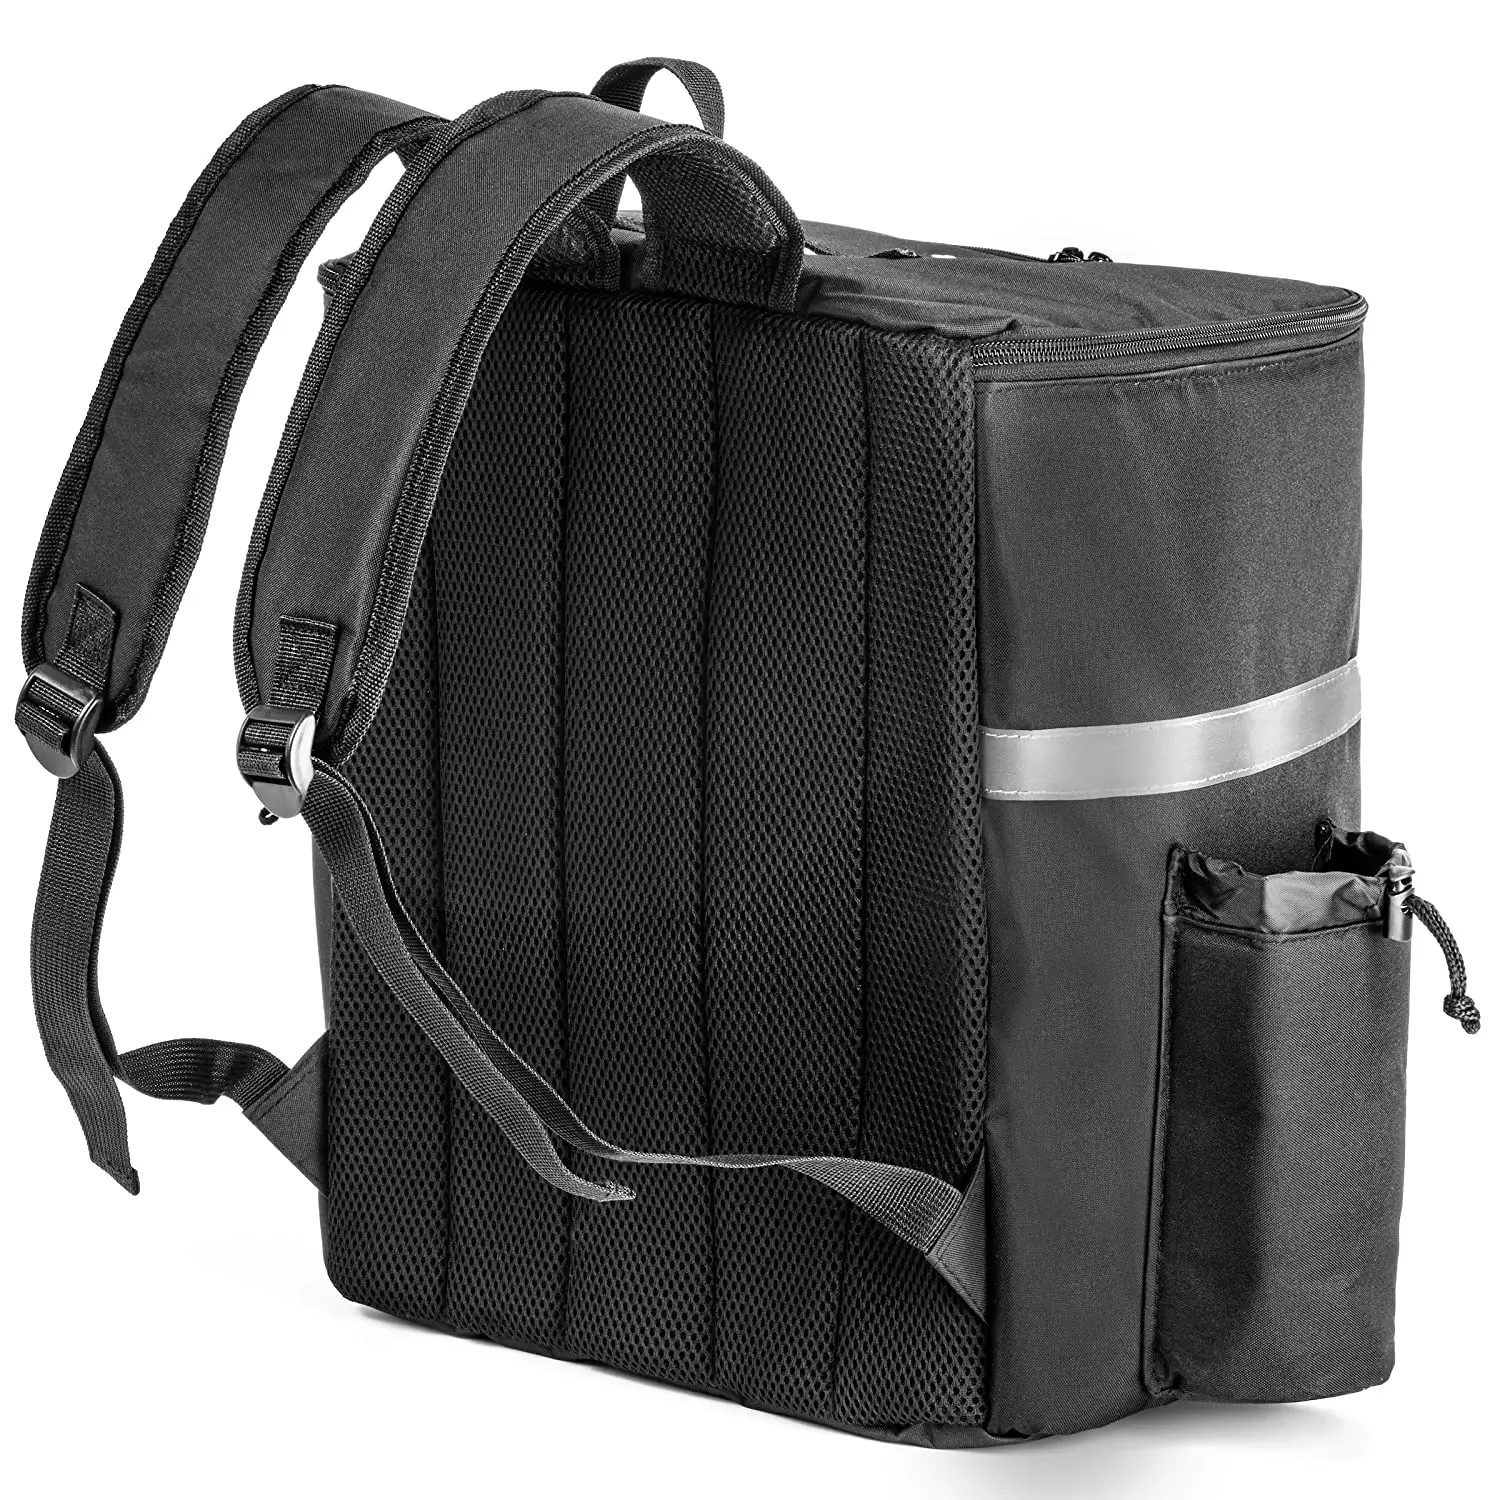 Thermal Insulated Food Delivery Backpack Pocket and Receipt Window Cooler Bag Backpack